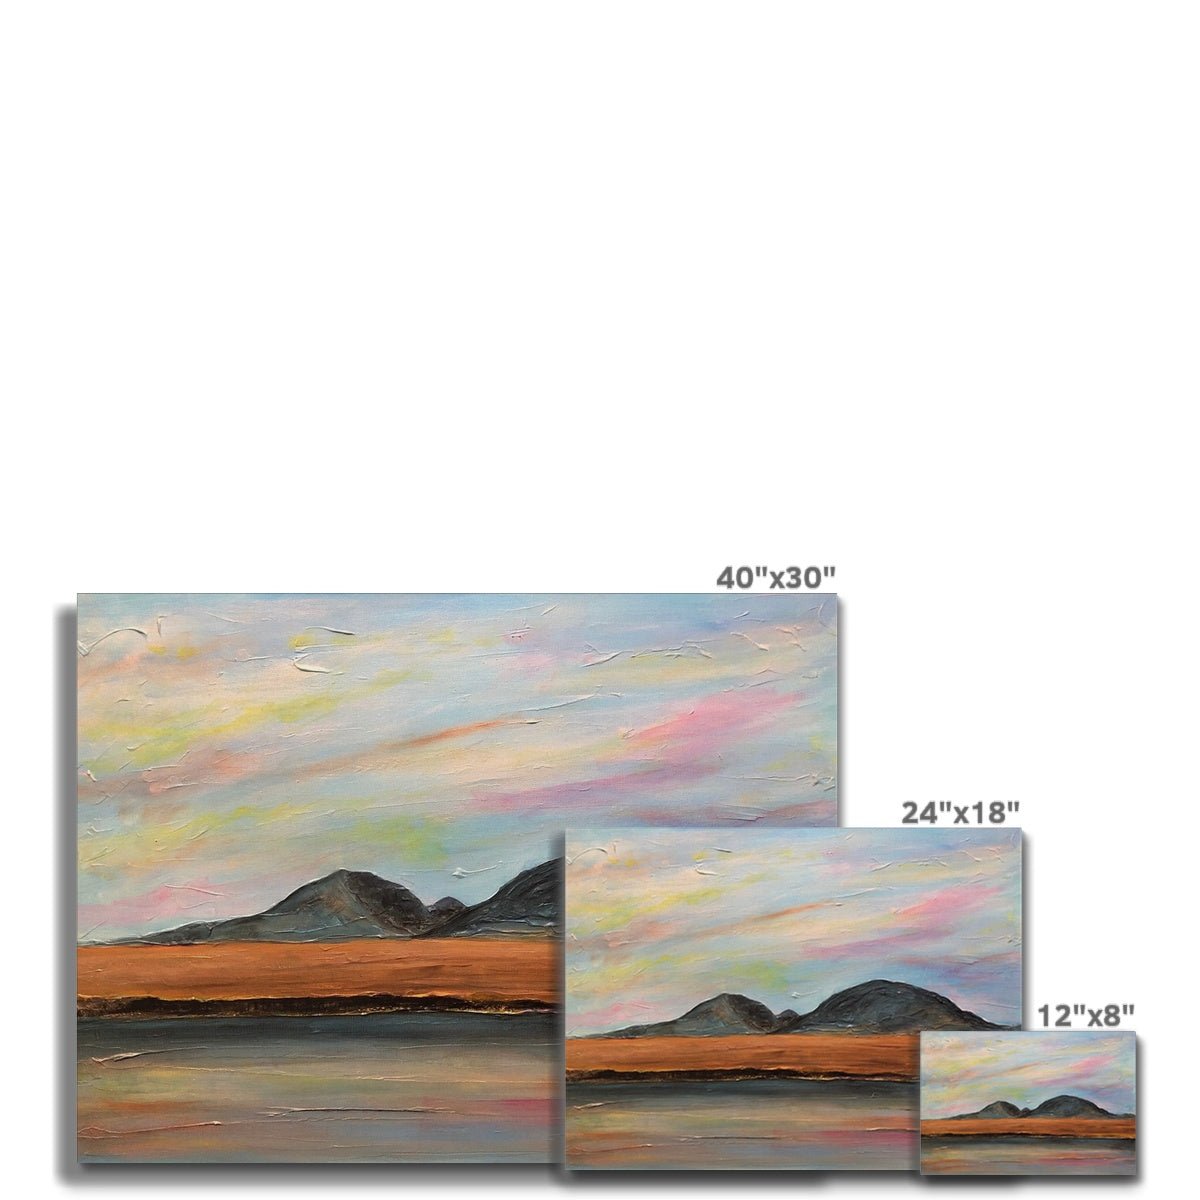 Jura Dawn Painting | Canvas From Scotland-Contemporary Stretched Canvas Prints-Hebridean Islands Art Gallery-Paintings, Prints, Homeware, Art Gifts From Scotland By Scottish Artist Kevin Hunter